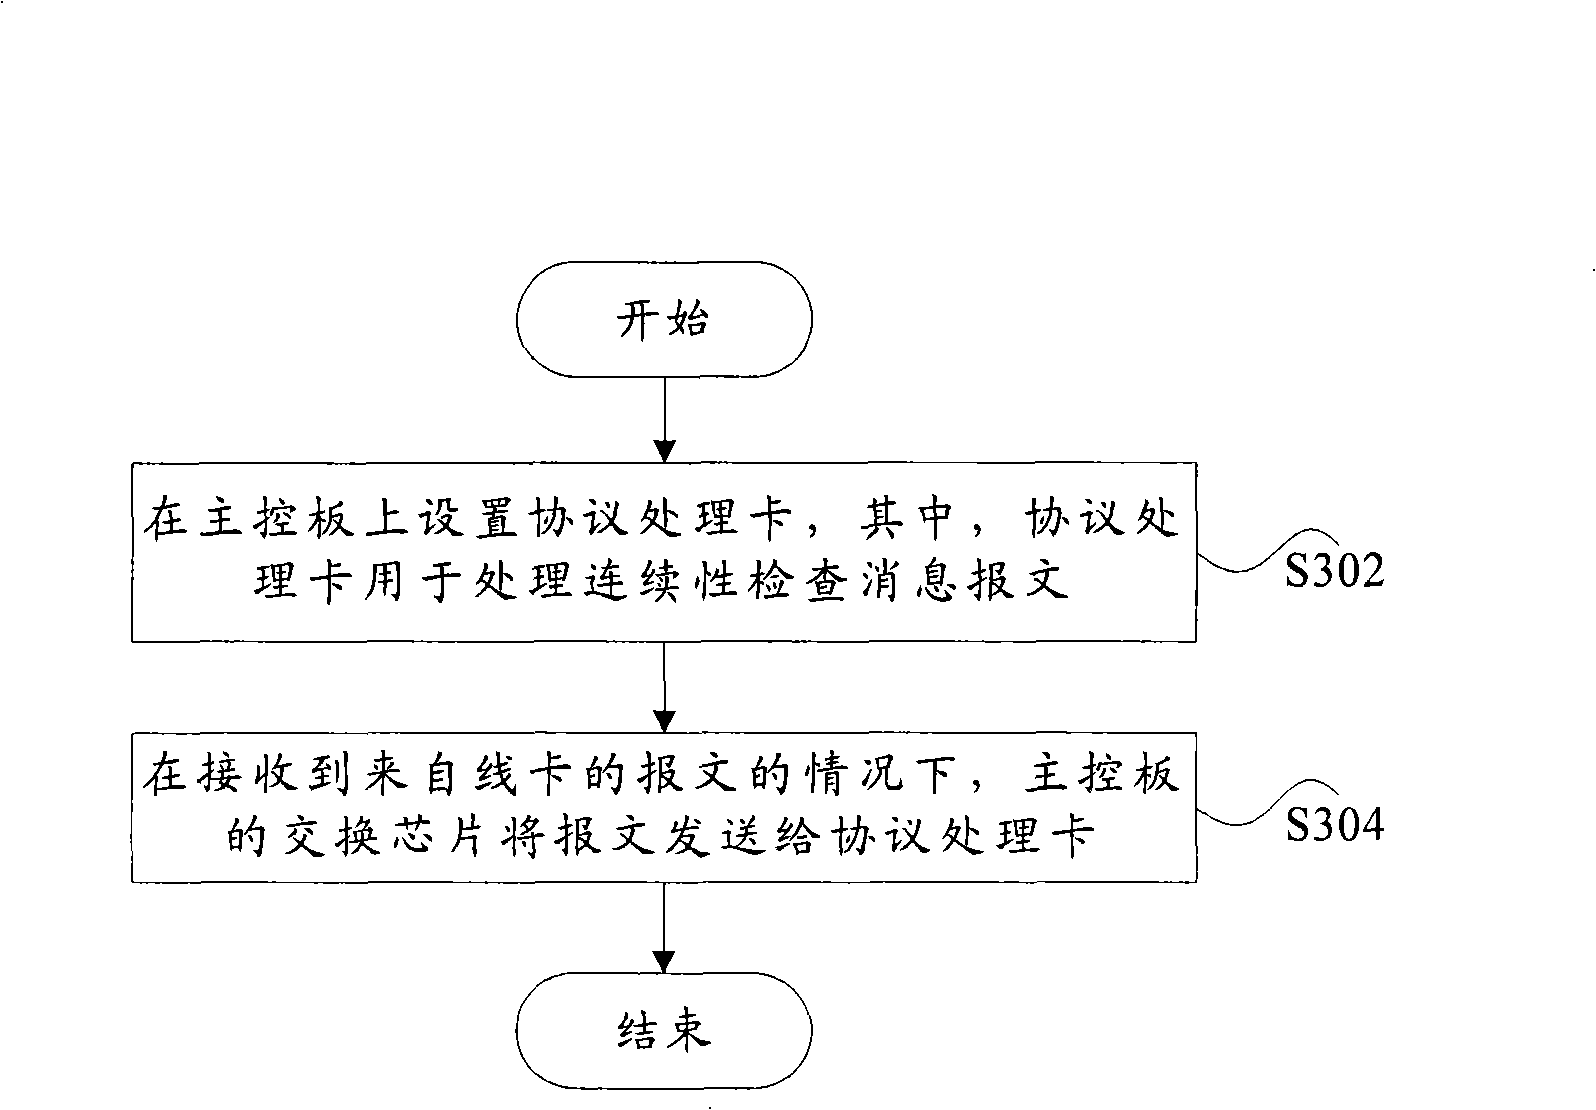 Method and apparatus for transmitting continuous check information message